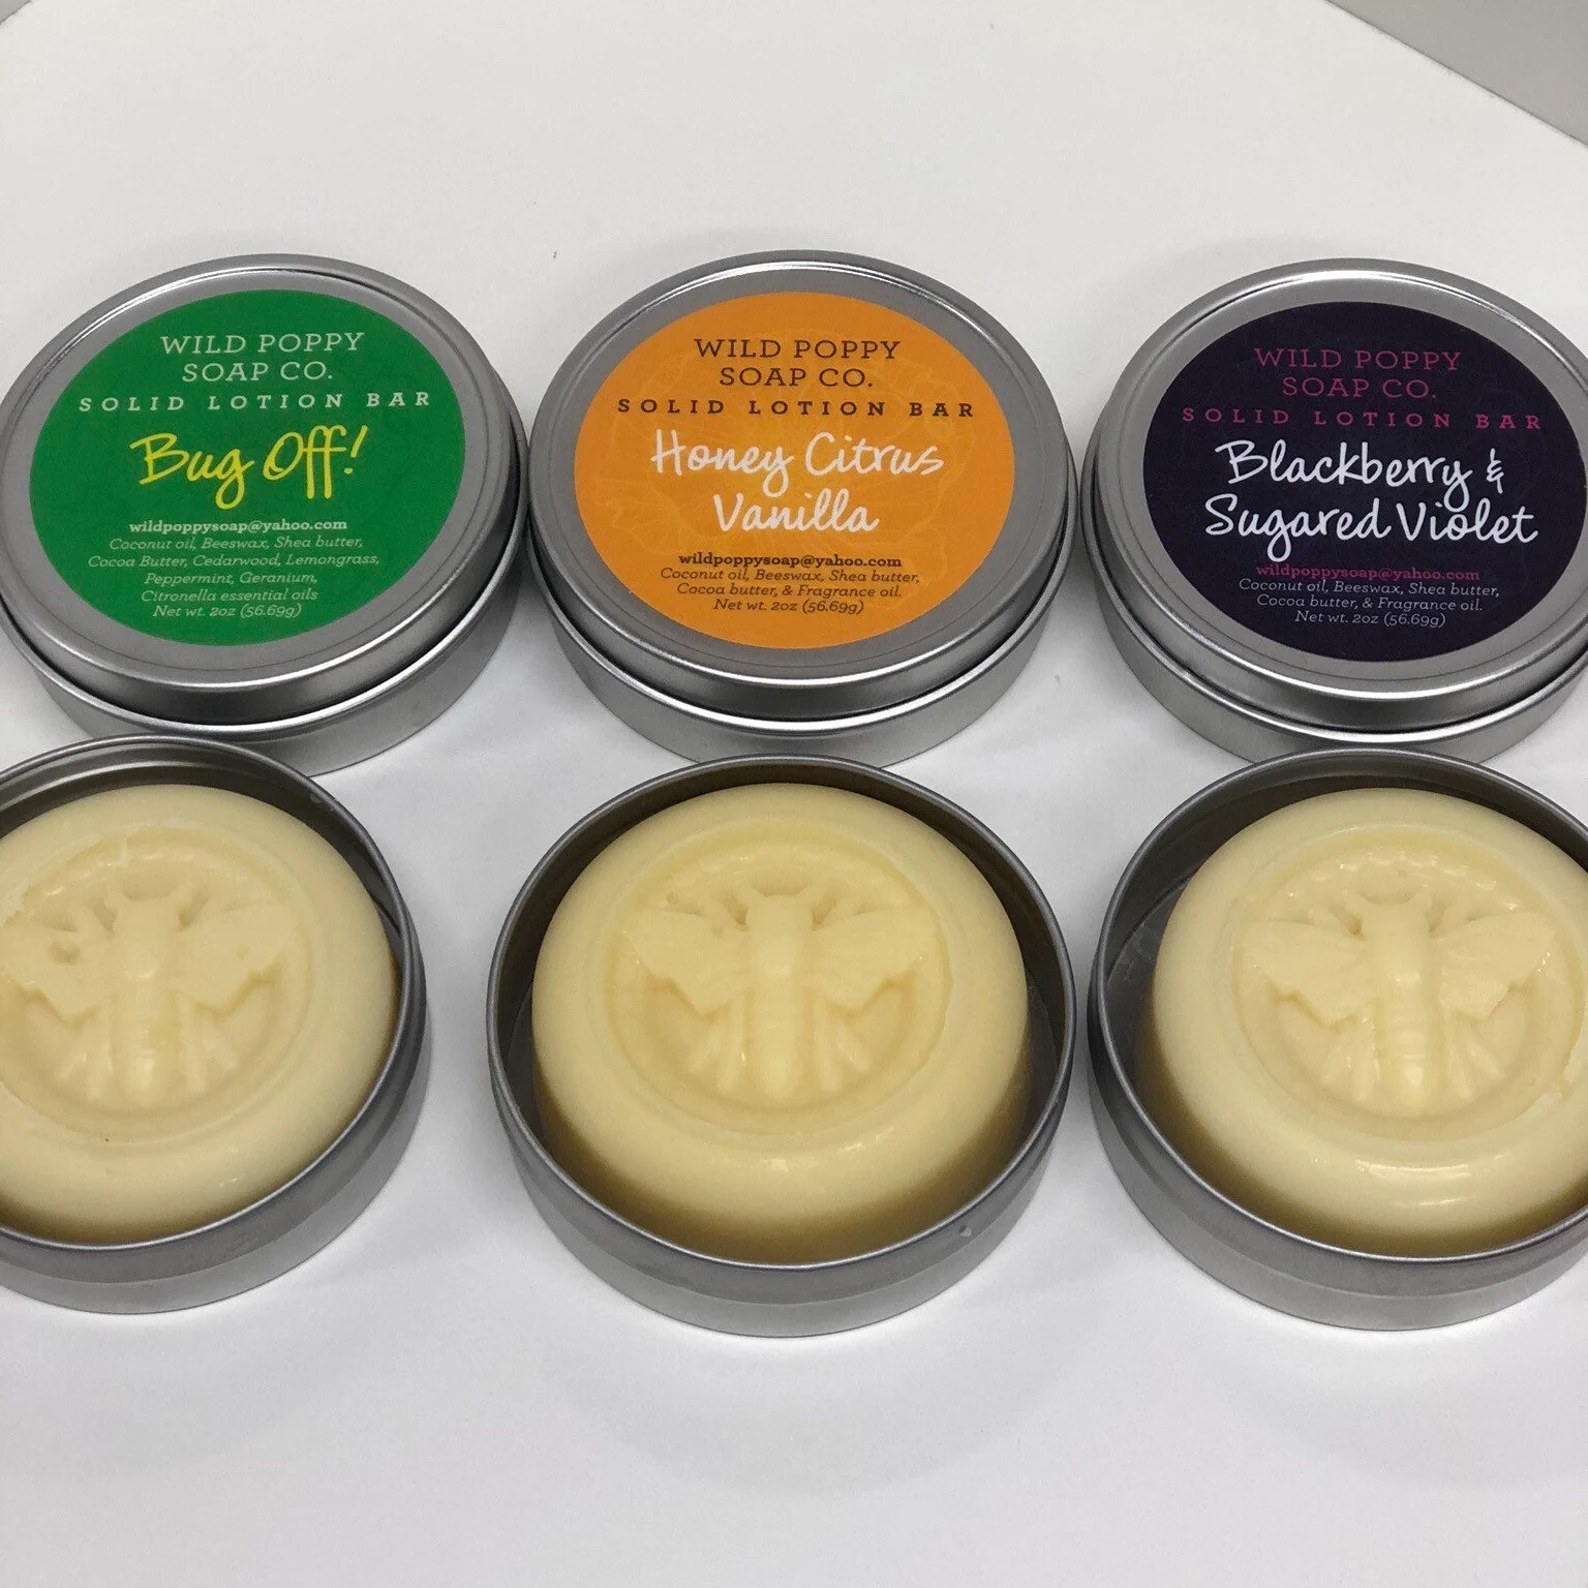 The lotion bars in the scents Bug Off!, Honey Citrus Vanilla, and Blackberry And Sugared Violet